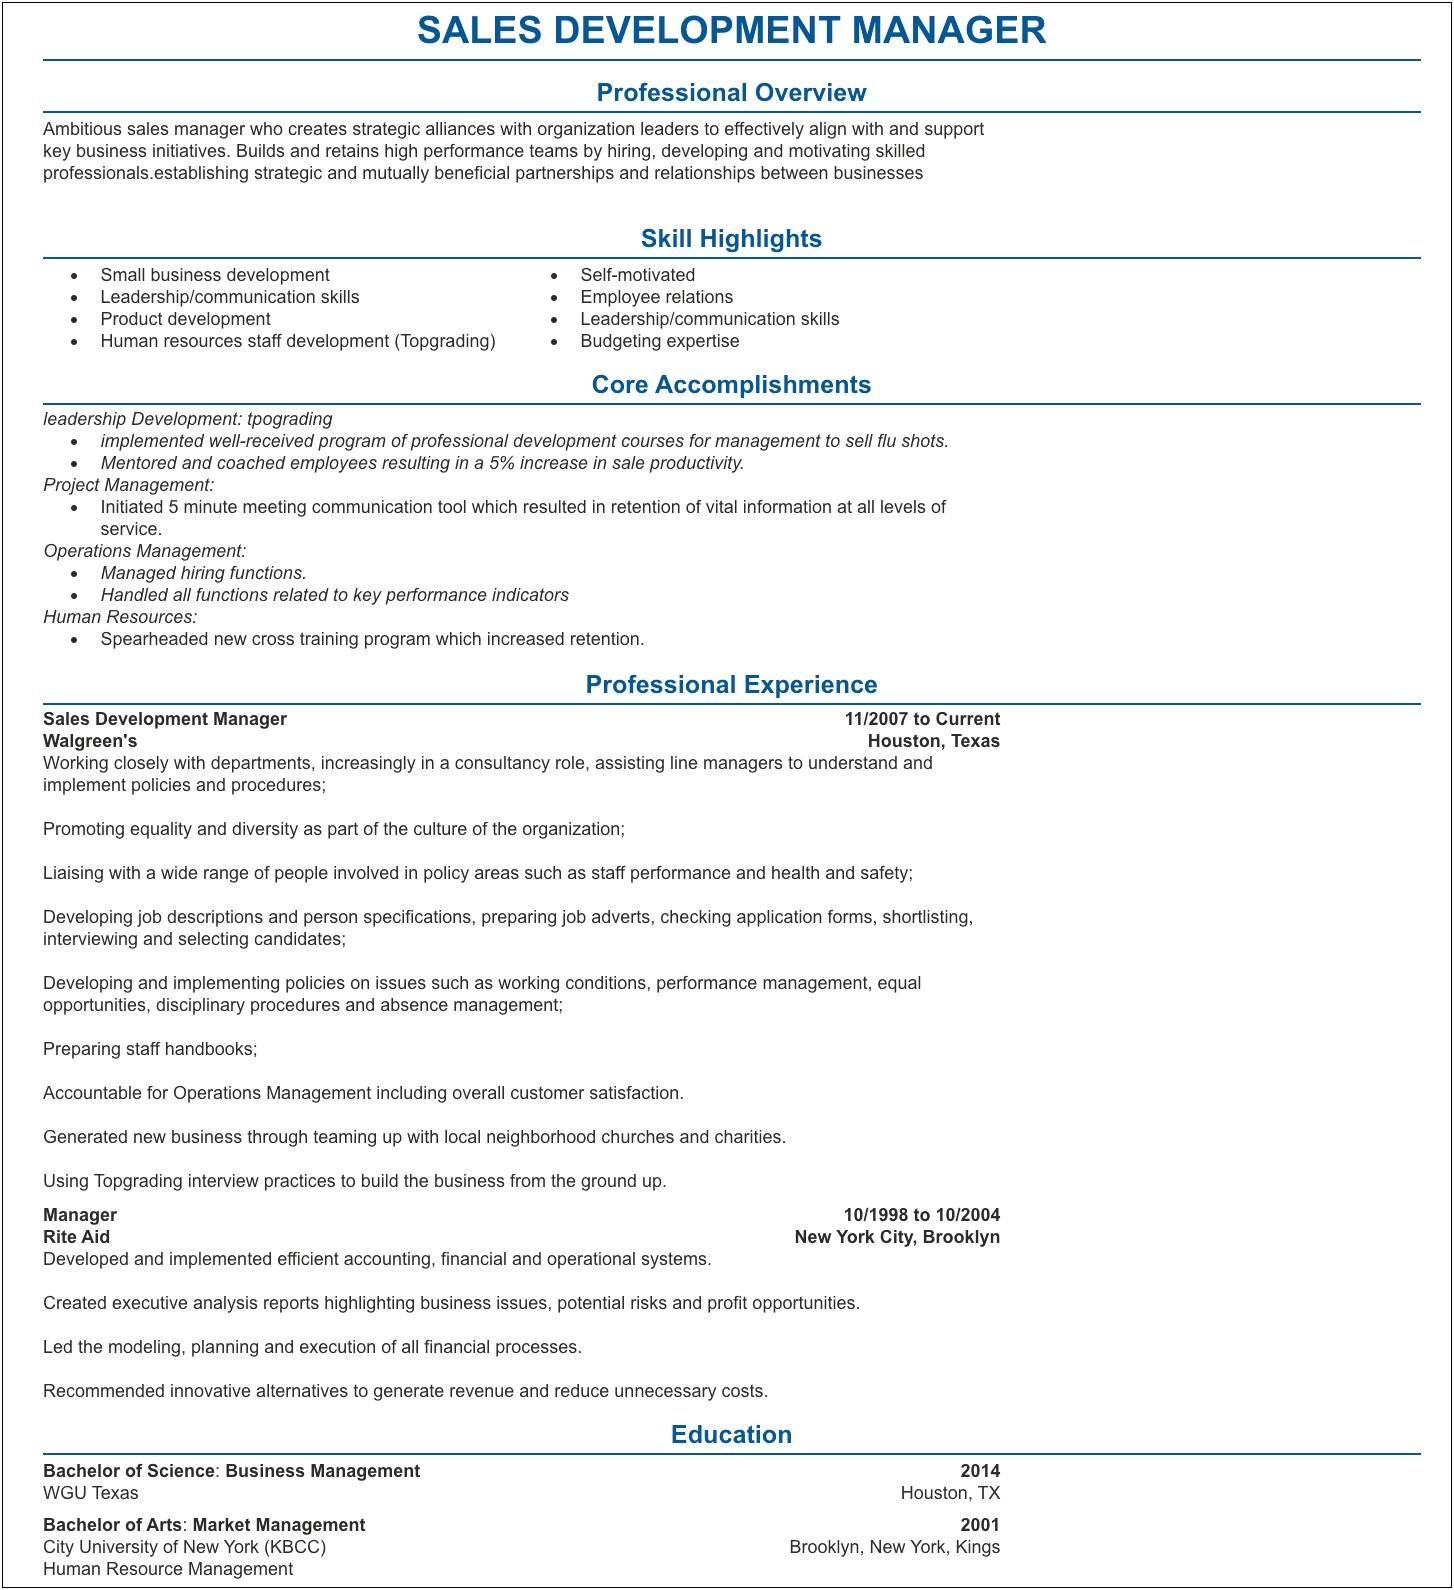 Administration Operations Manager Resume Sections Ideal Example